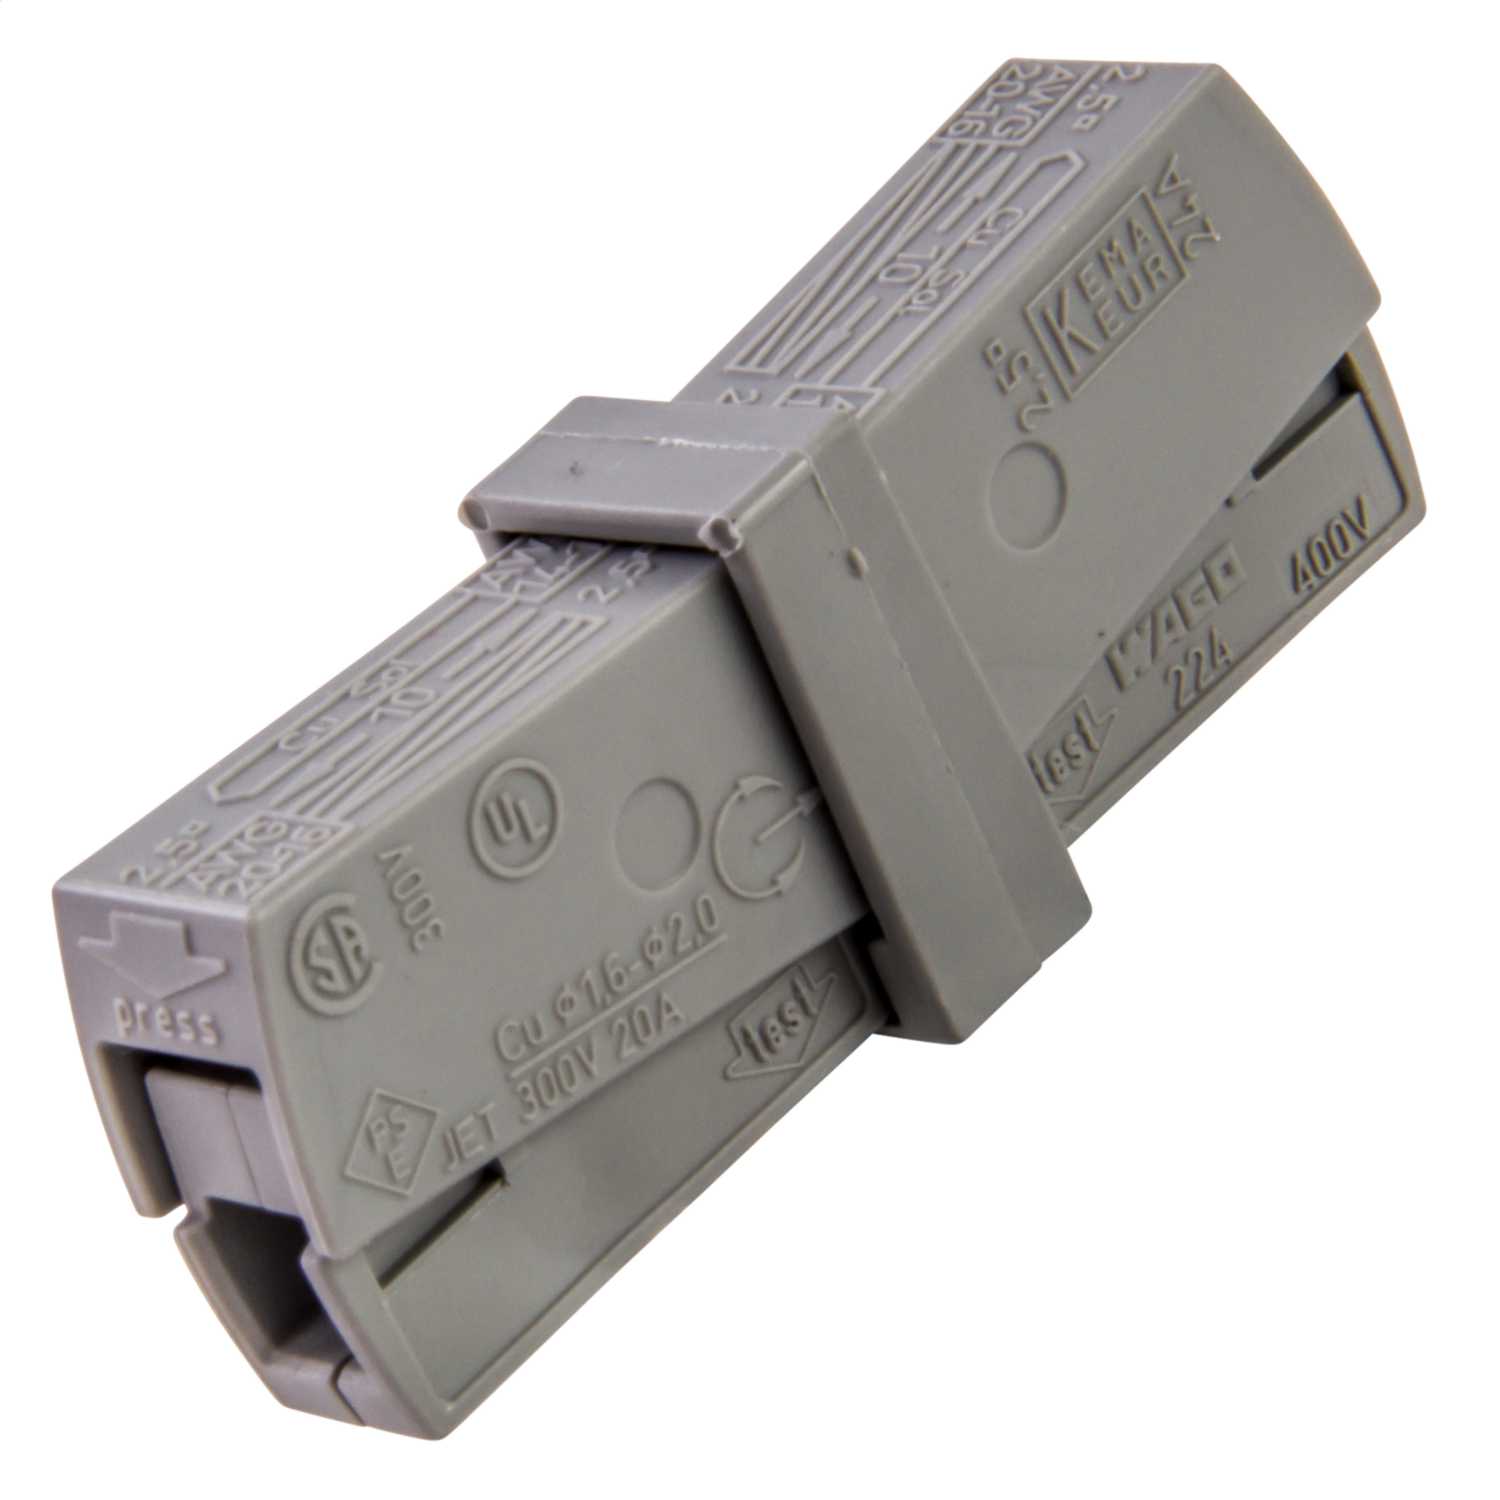 Wago 2 conductor 2.5mm LIGHTING coupler 24A 224-201 - West Midland Electrics | CCTV & Electrical Wholesaler